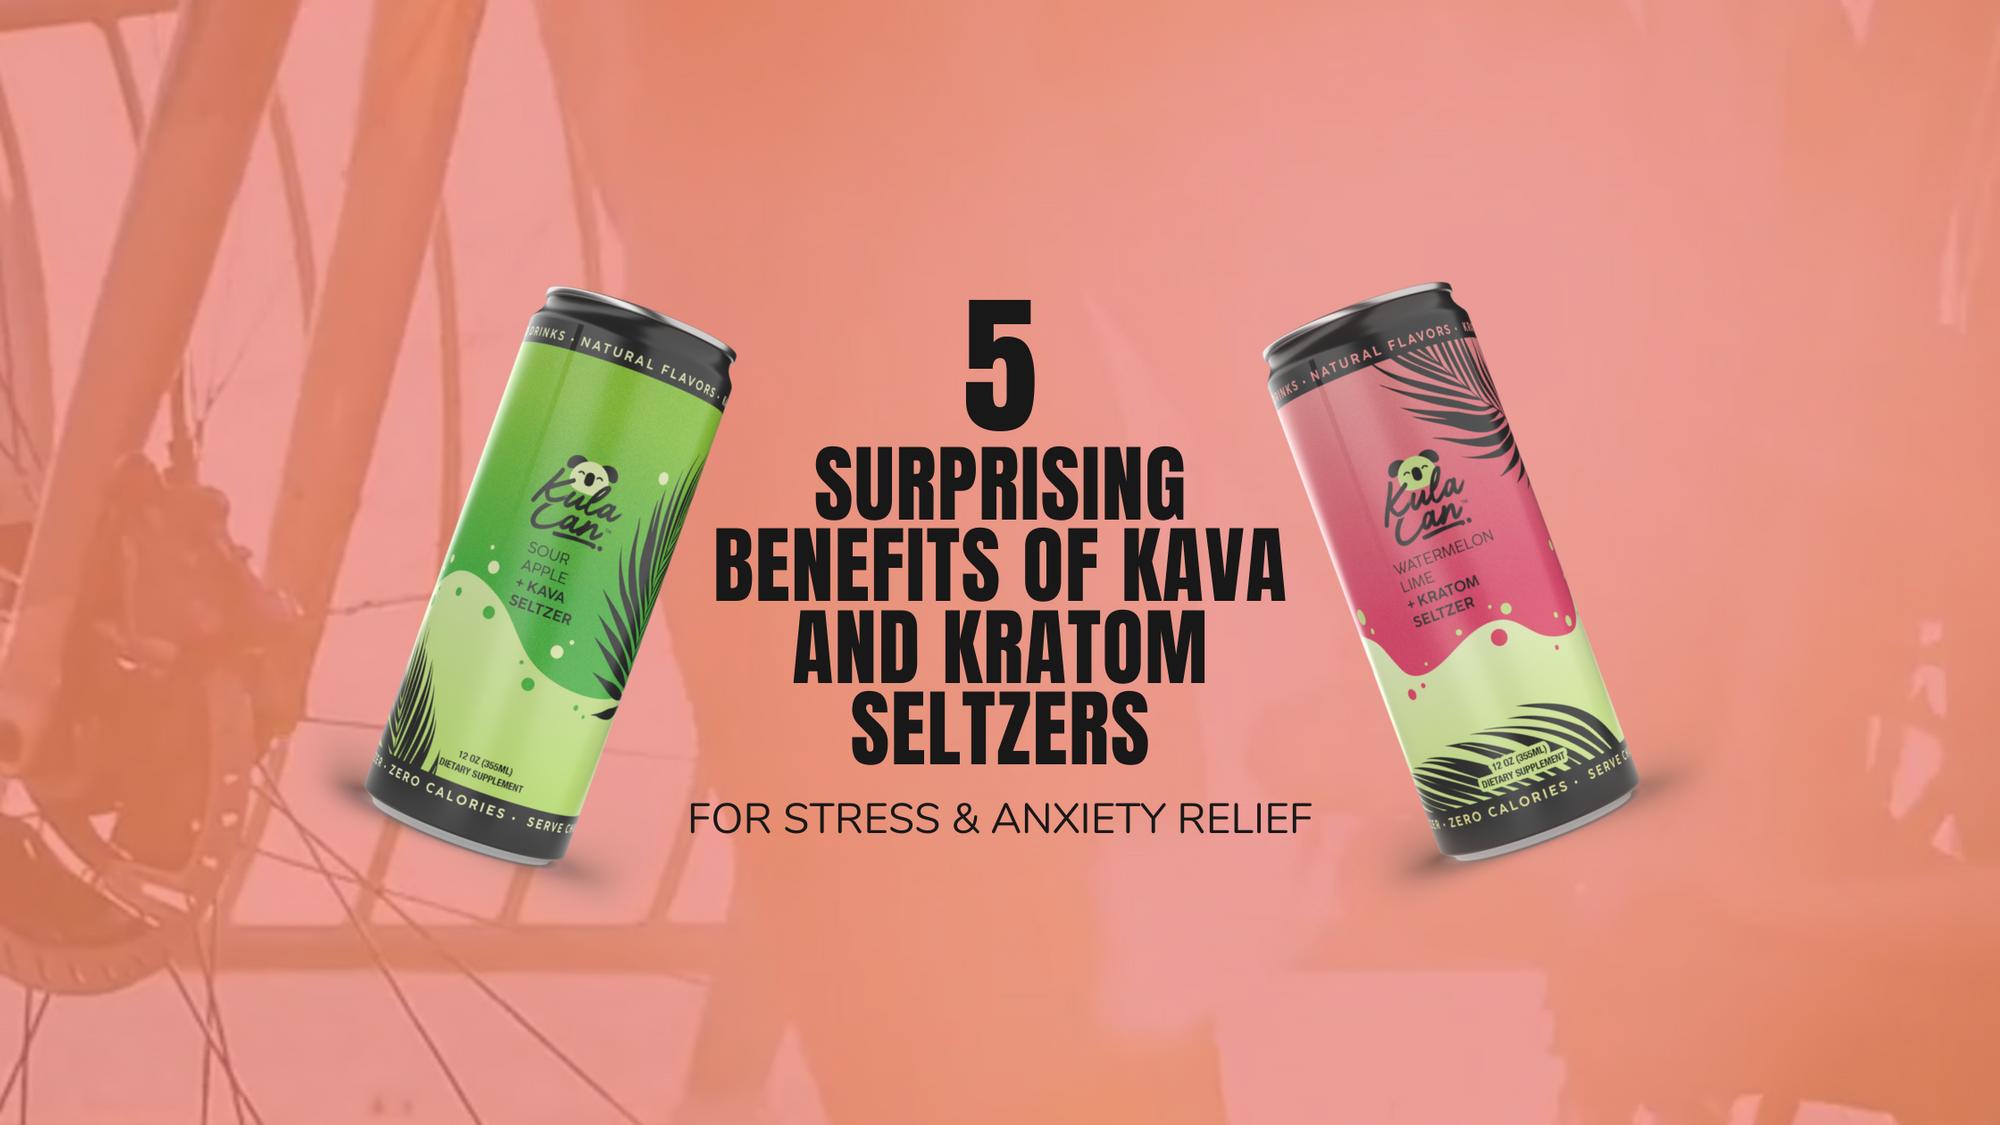 5 Surprising Benefits of Kava and Kratom Seltzers for Stress and Anxiety Relief